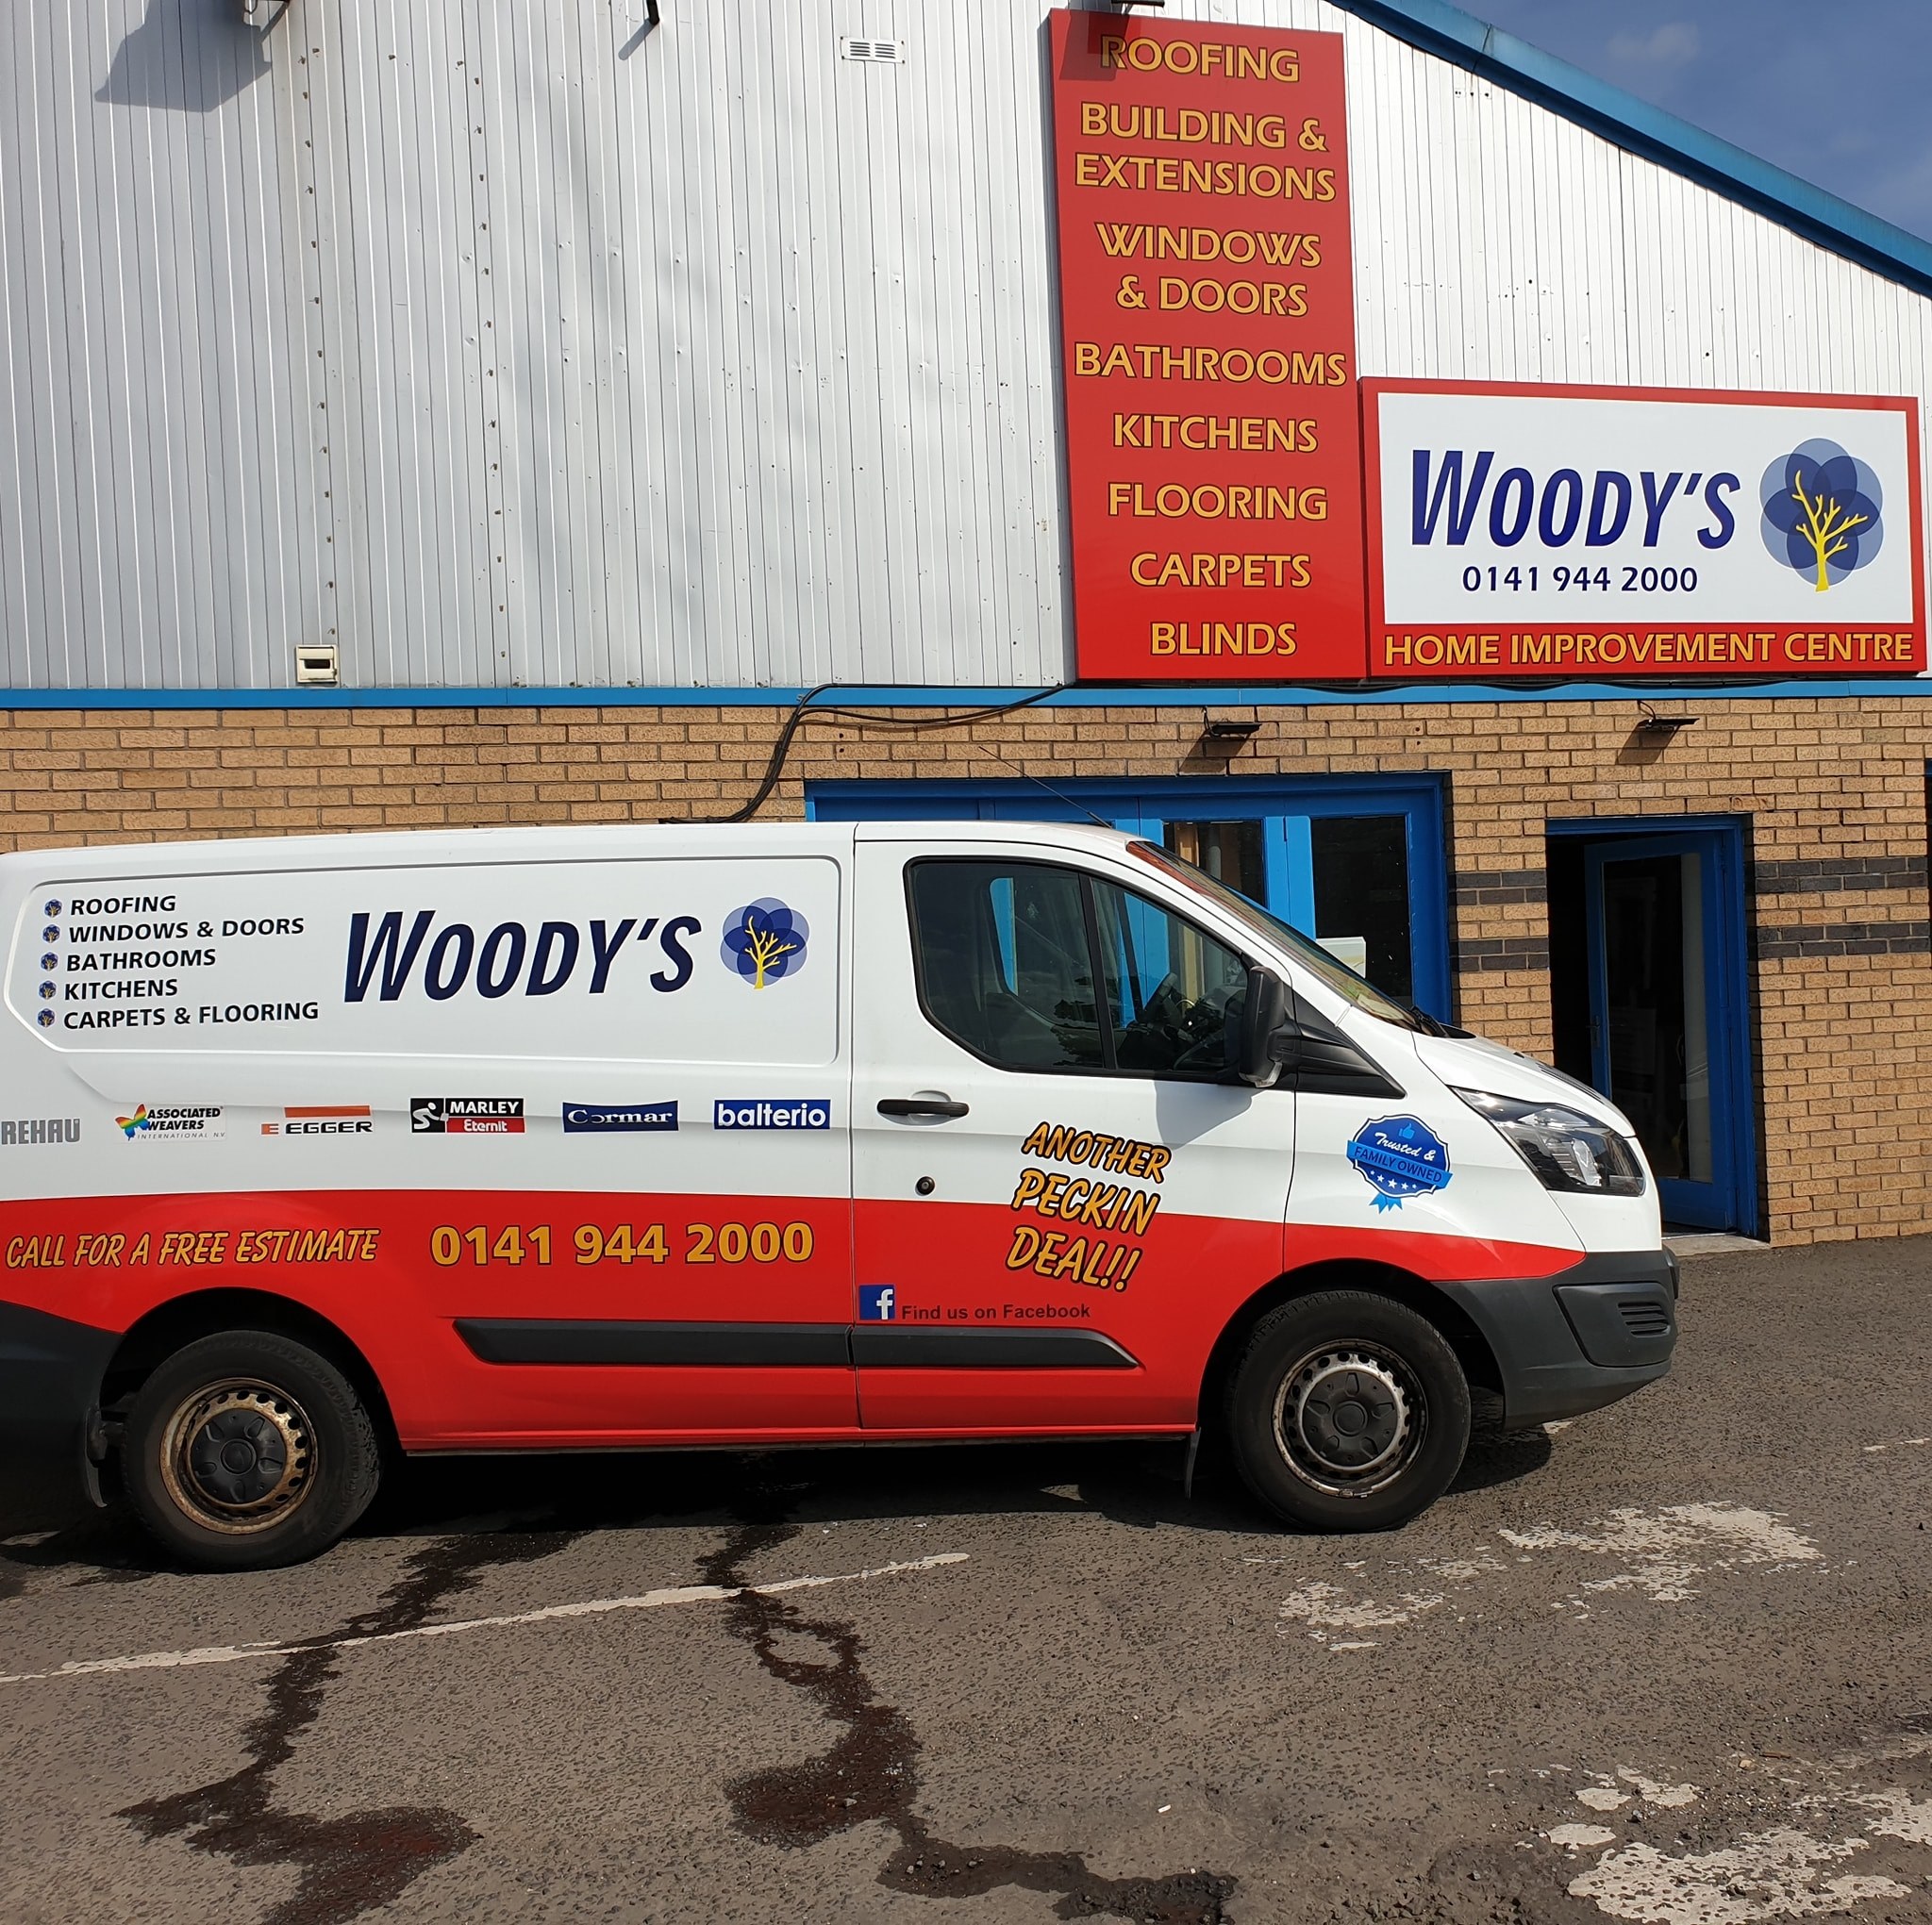 Woody's Home Improvement Centre